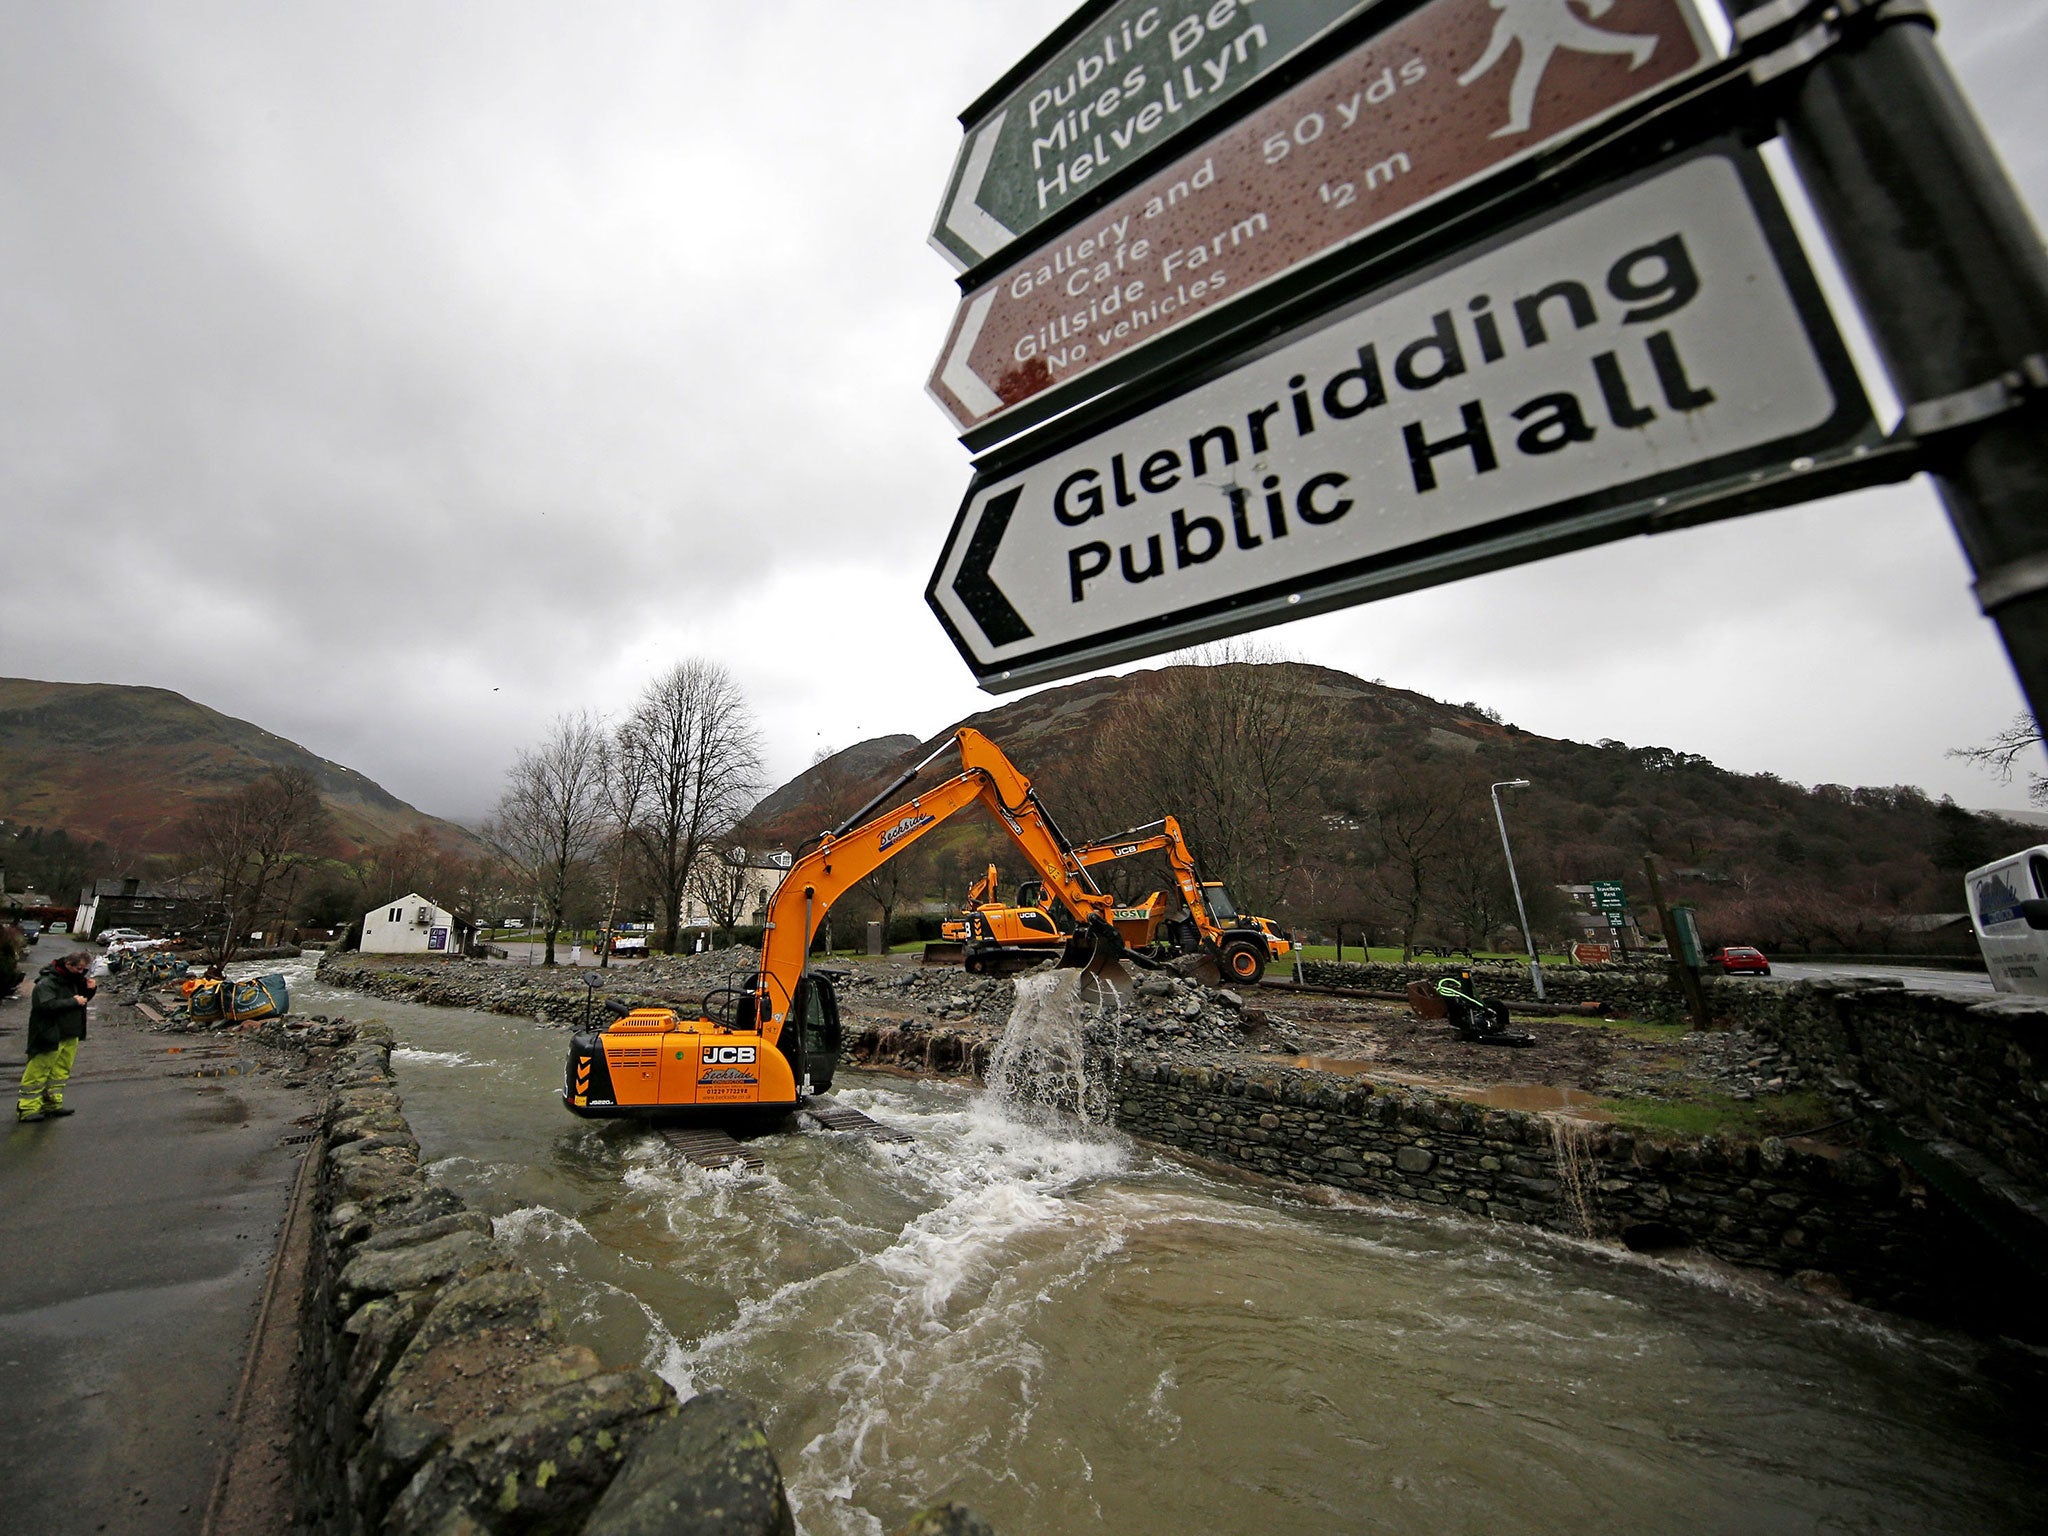 Glenridding Beck in Cumbria is dredged again to remove boulders and rocks, which were washed down from the fells during previous heavy rain, in order to prevent further flooding.